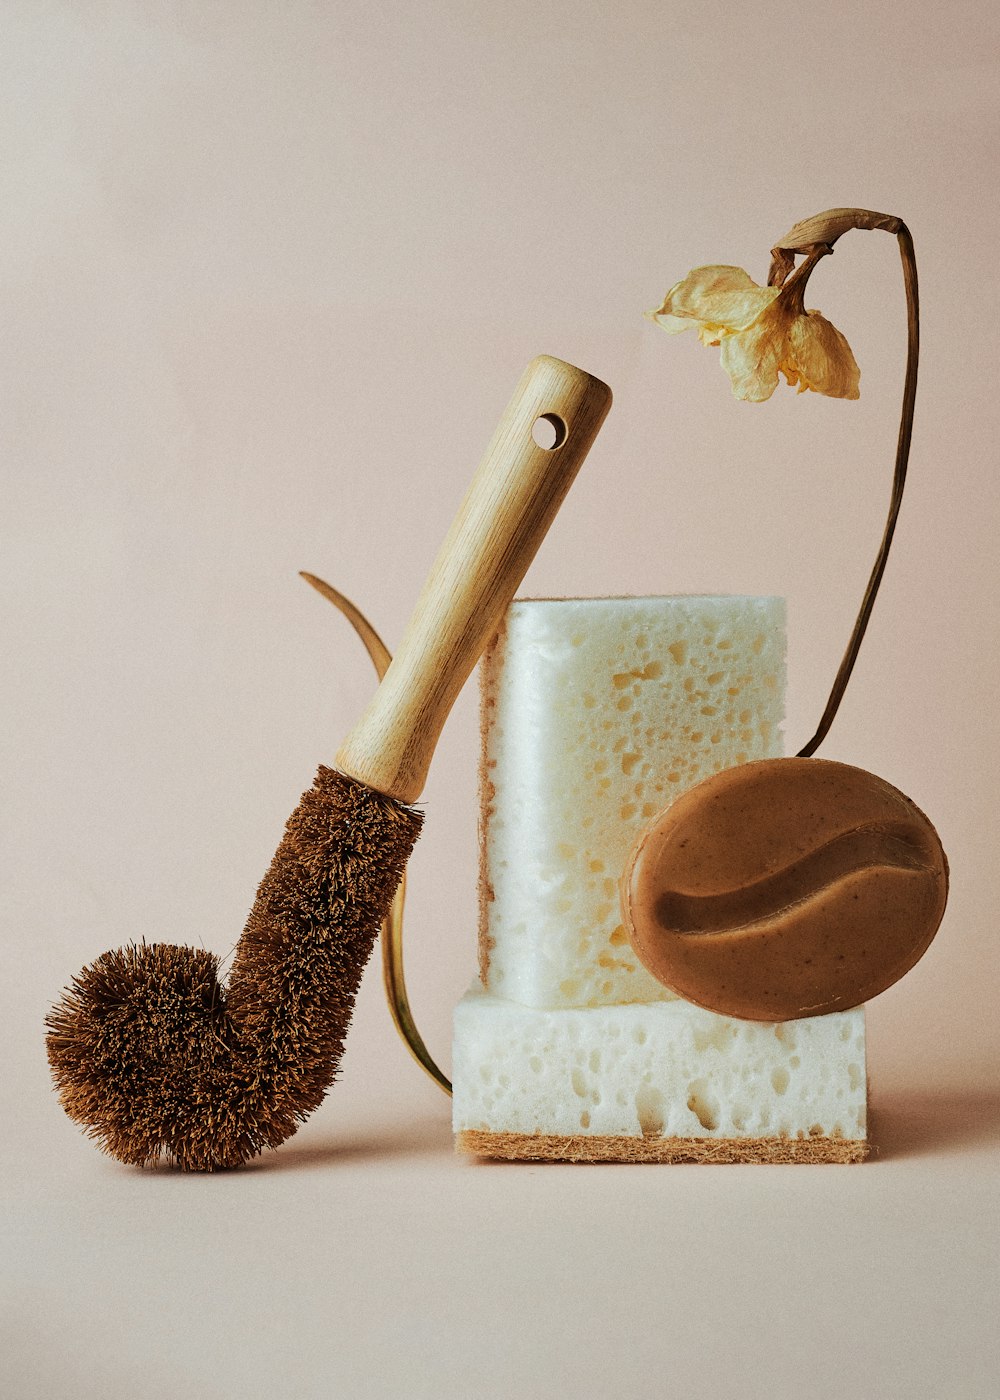 a piece of cake next to a brush and a pipe